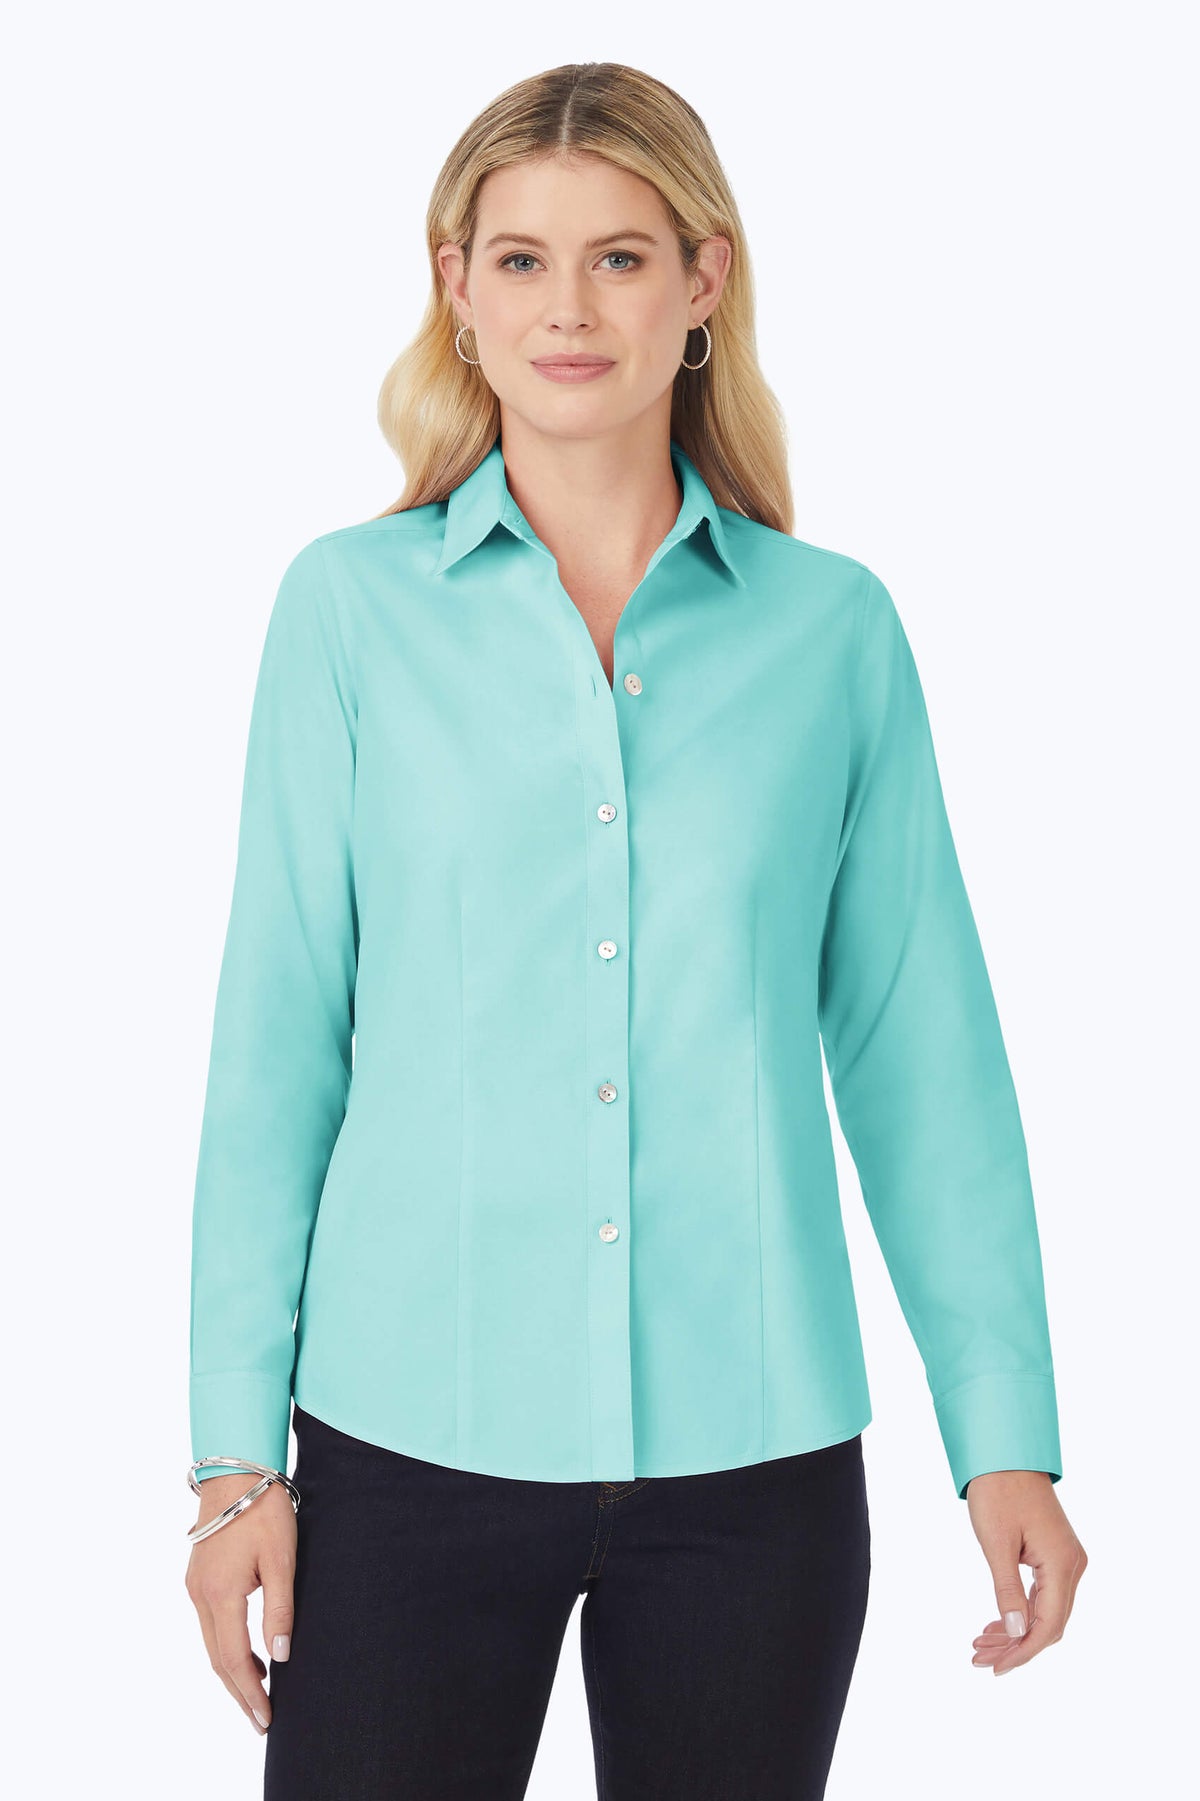 Dianna Essential Pinpoint Non-Iron Shirt #color_oceanside